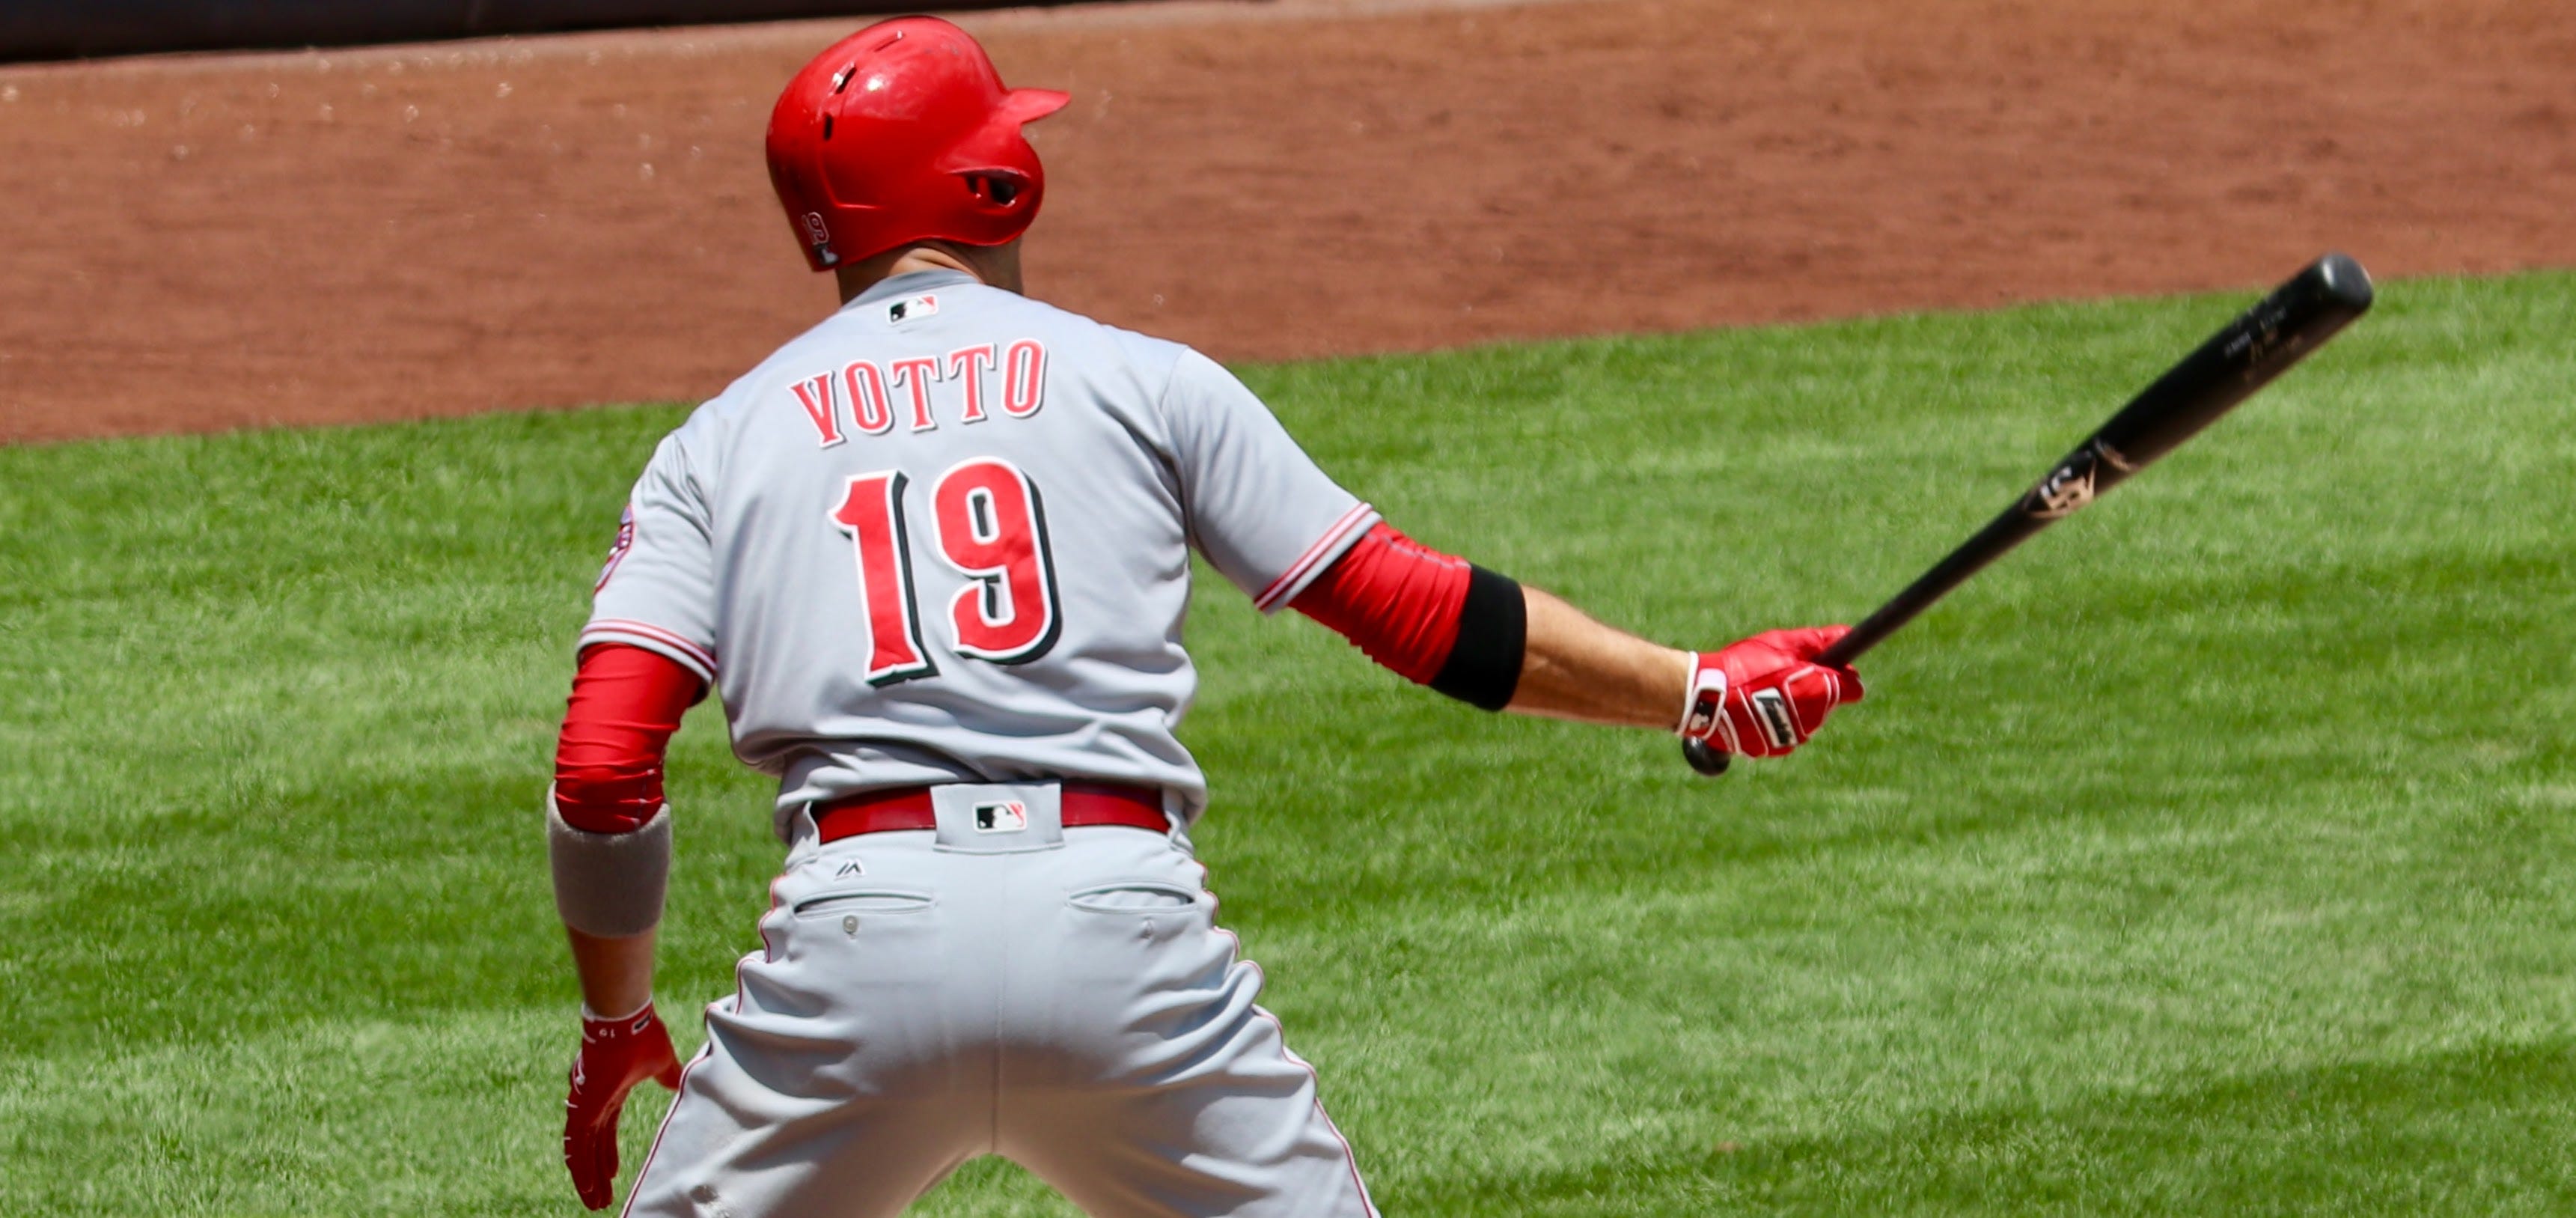 Never doubt Joey Votto. Ever.